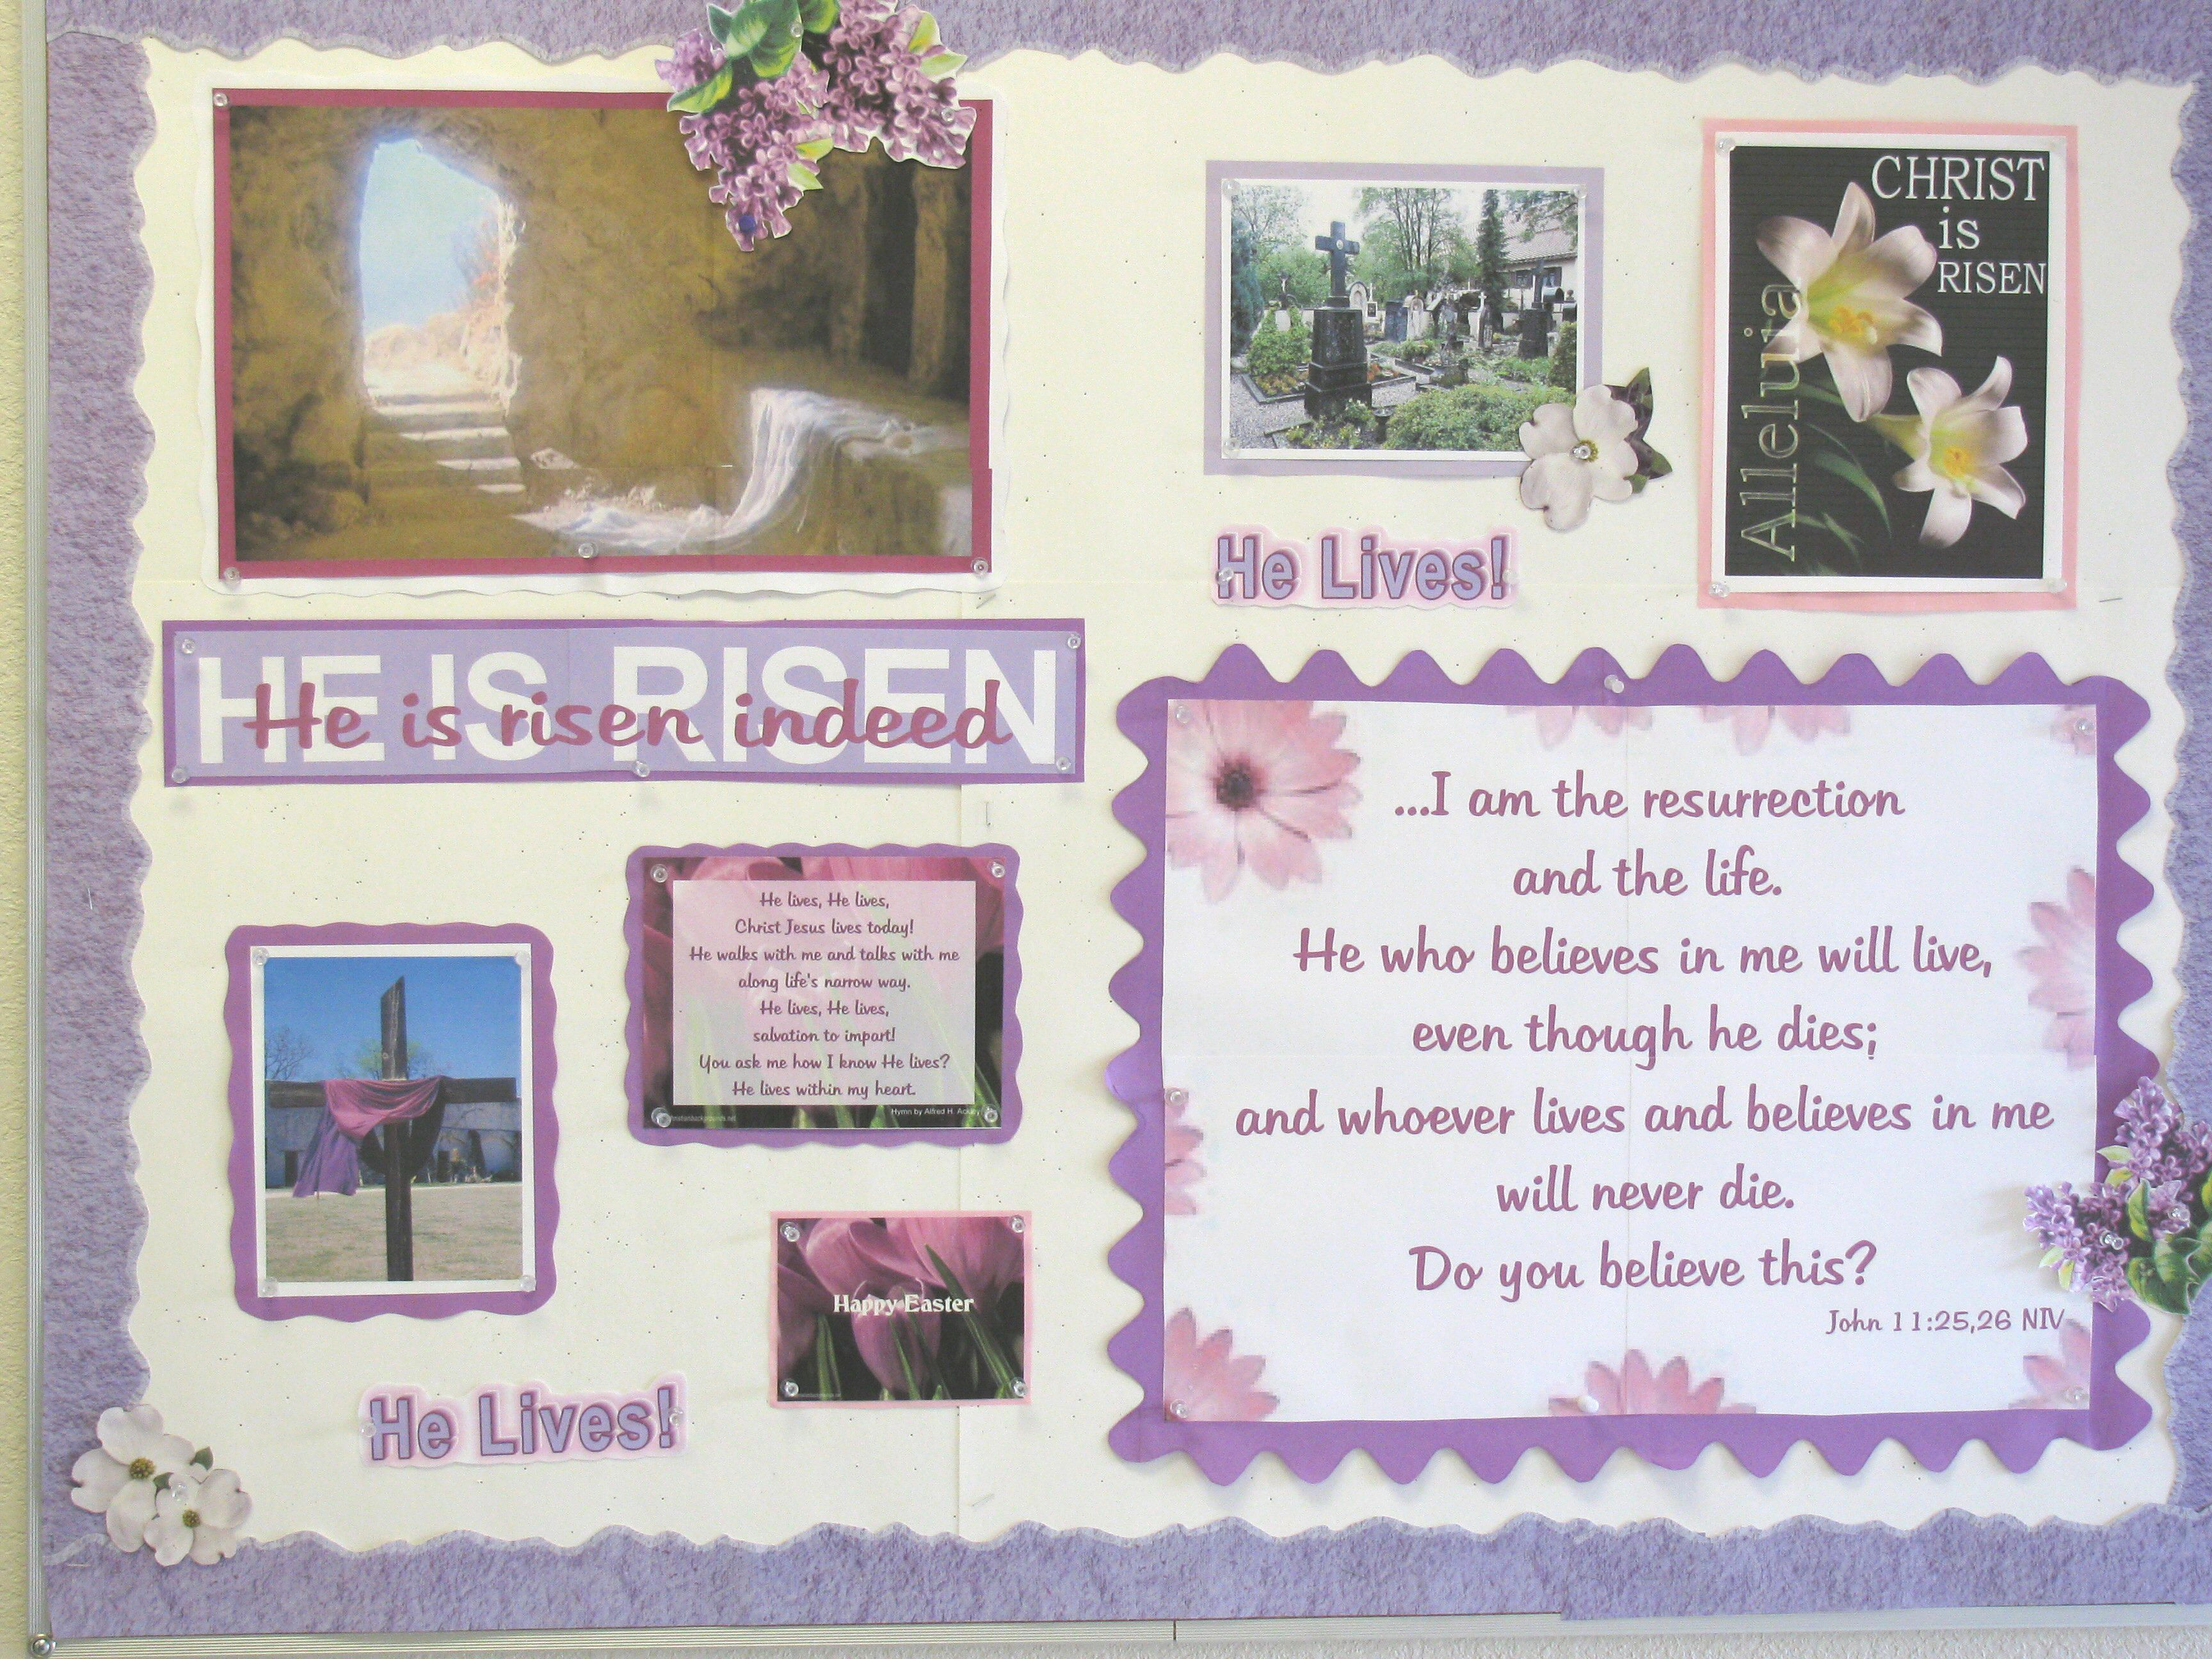 Christian School Easter Party Ideas
 Pin by Audrey Smith on Bulletin Boards